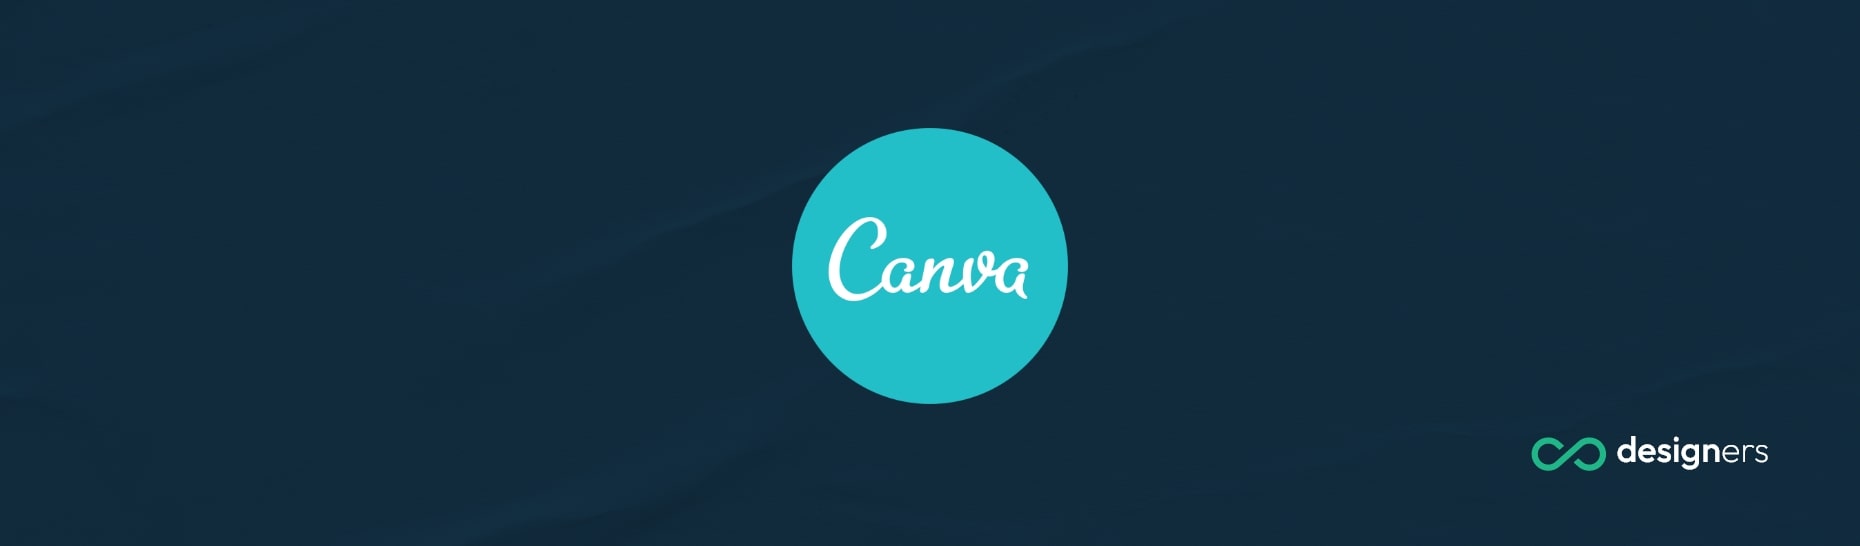 How Do I Download the Canva App on My Laptop?